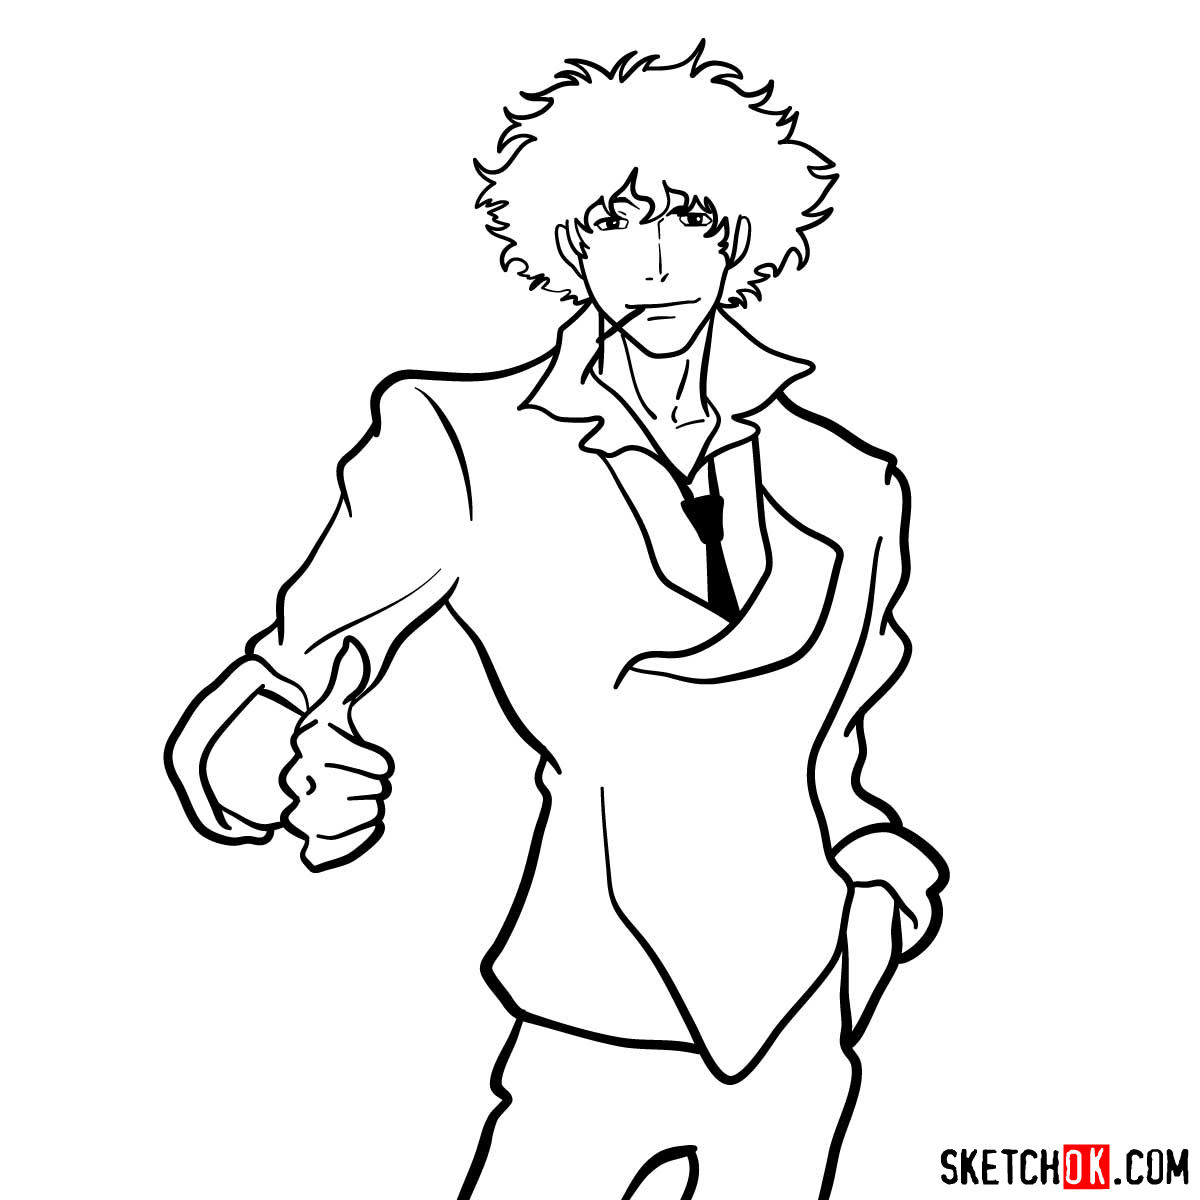 How to draw Spike Spiegel from Cowboy Bebop